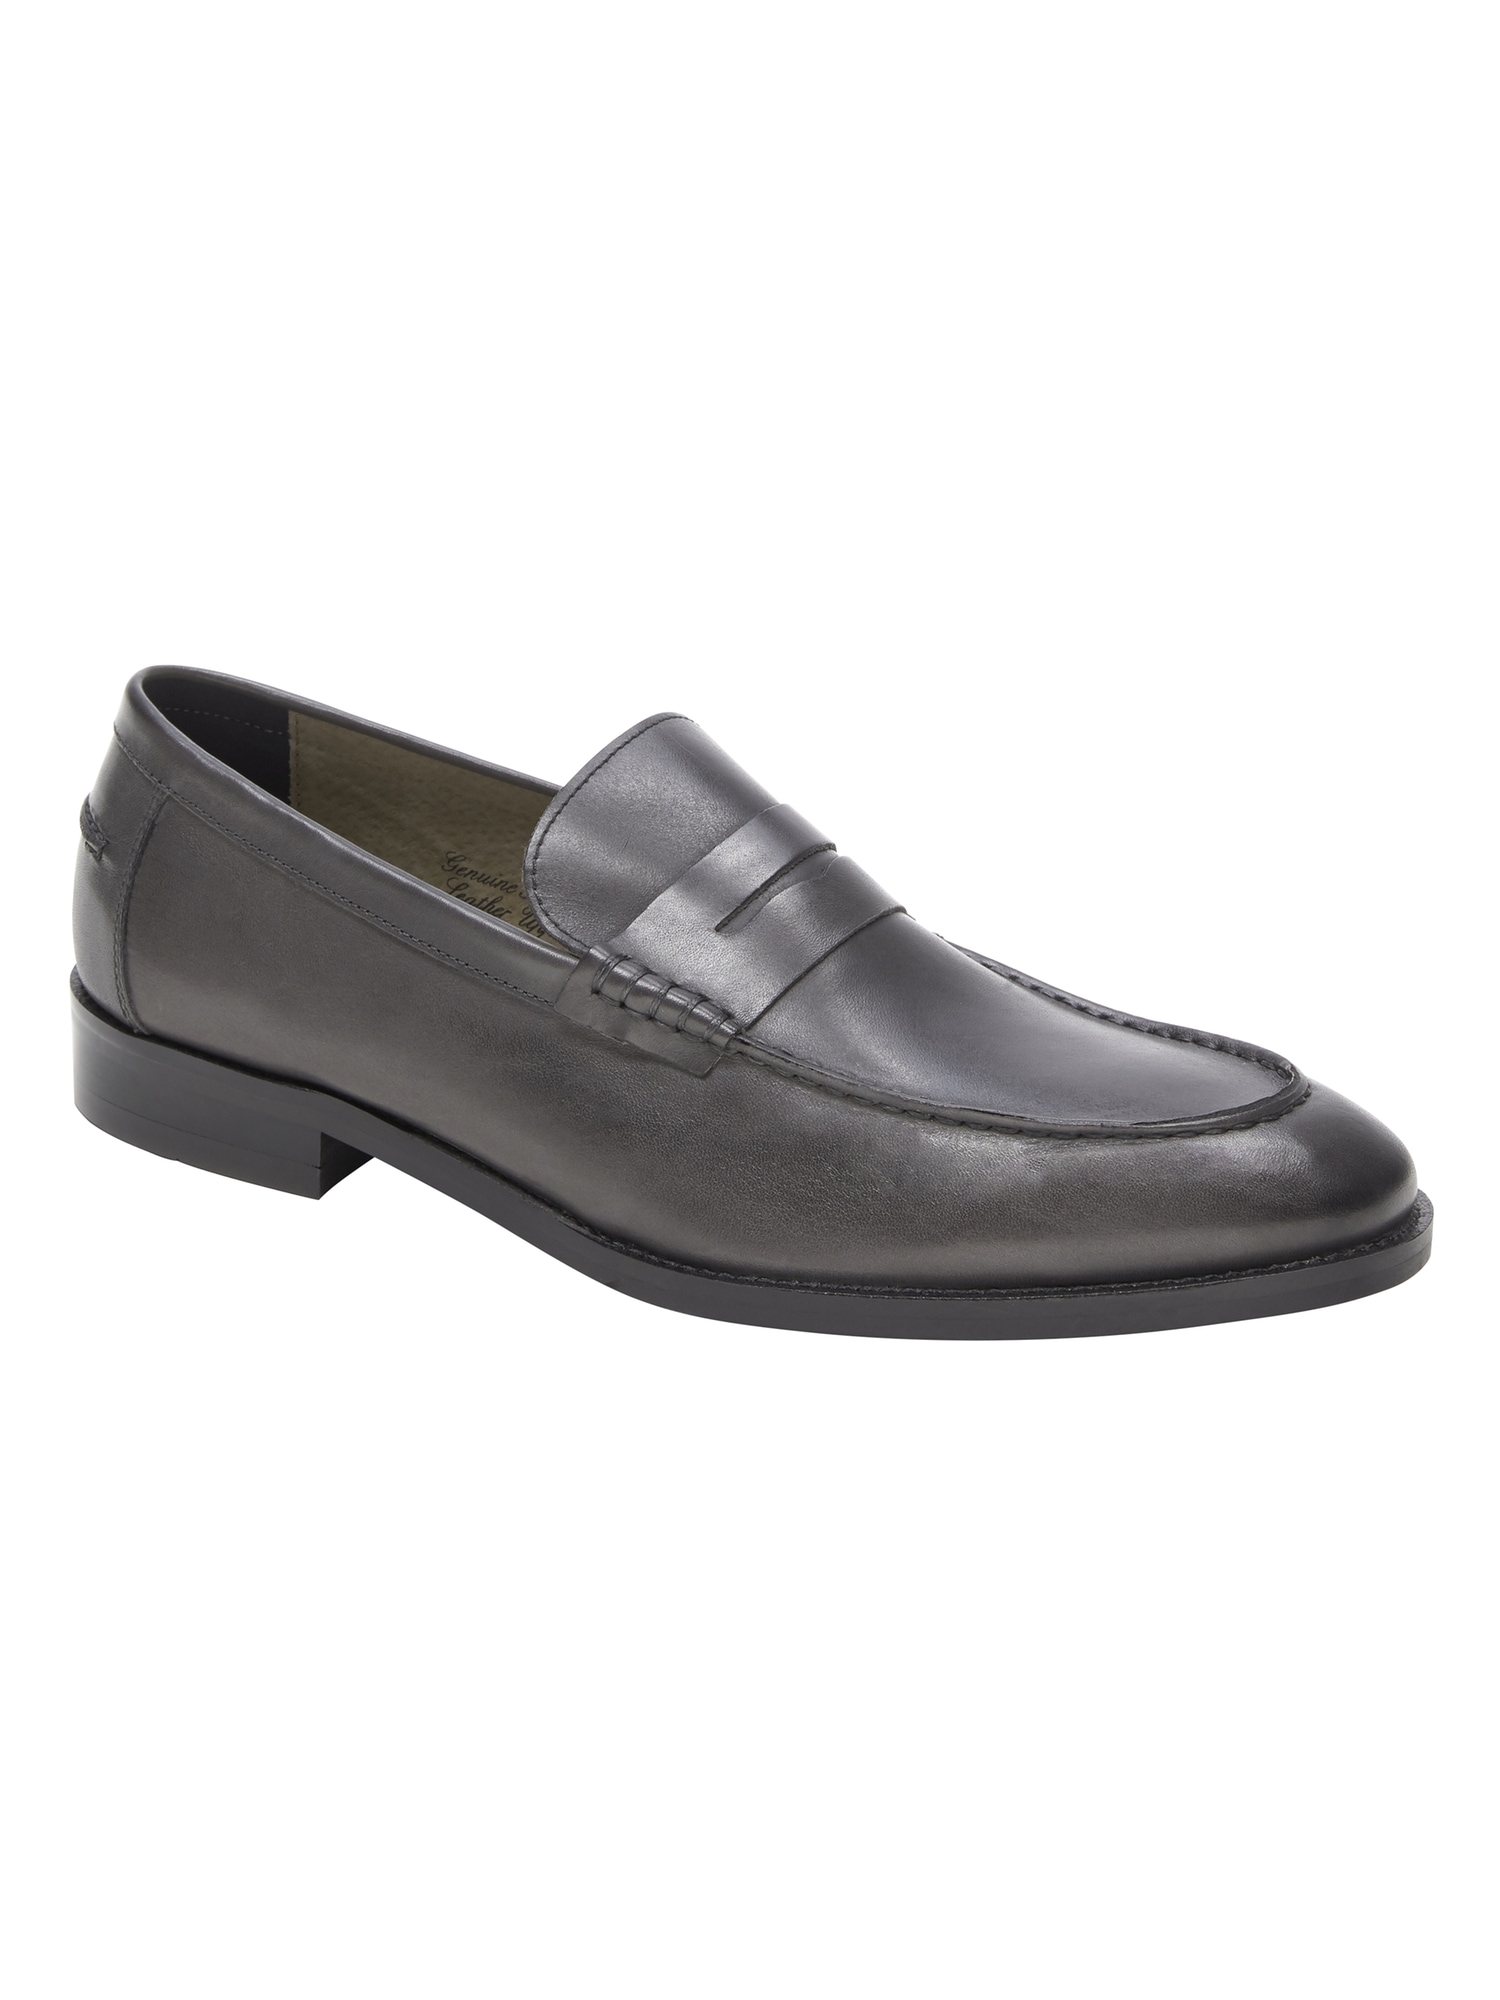 Dellbrook Italian Leather Loafer